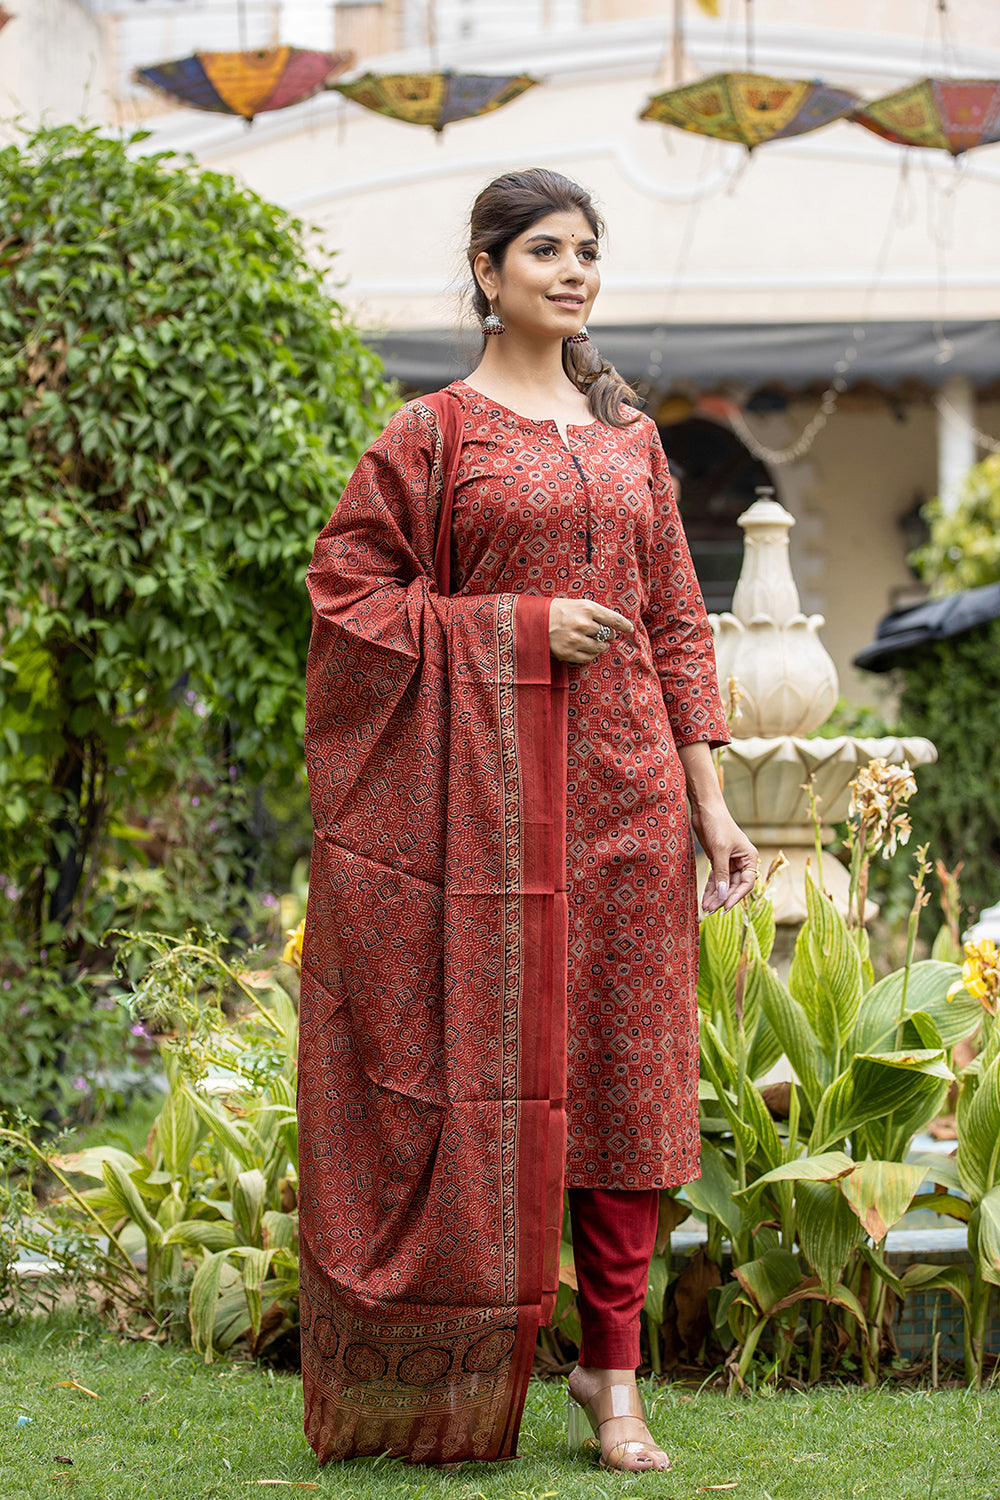 Red Printed Cotton Suit Set